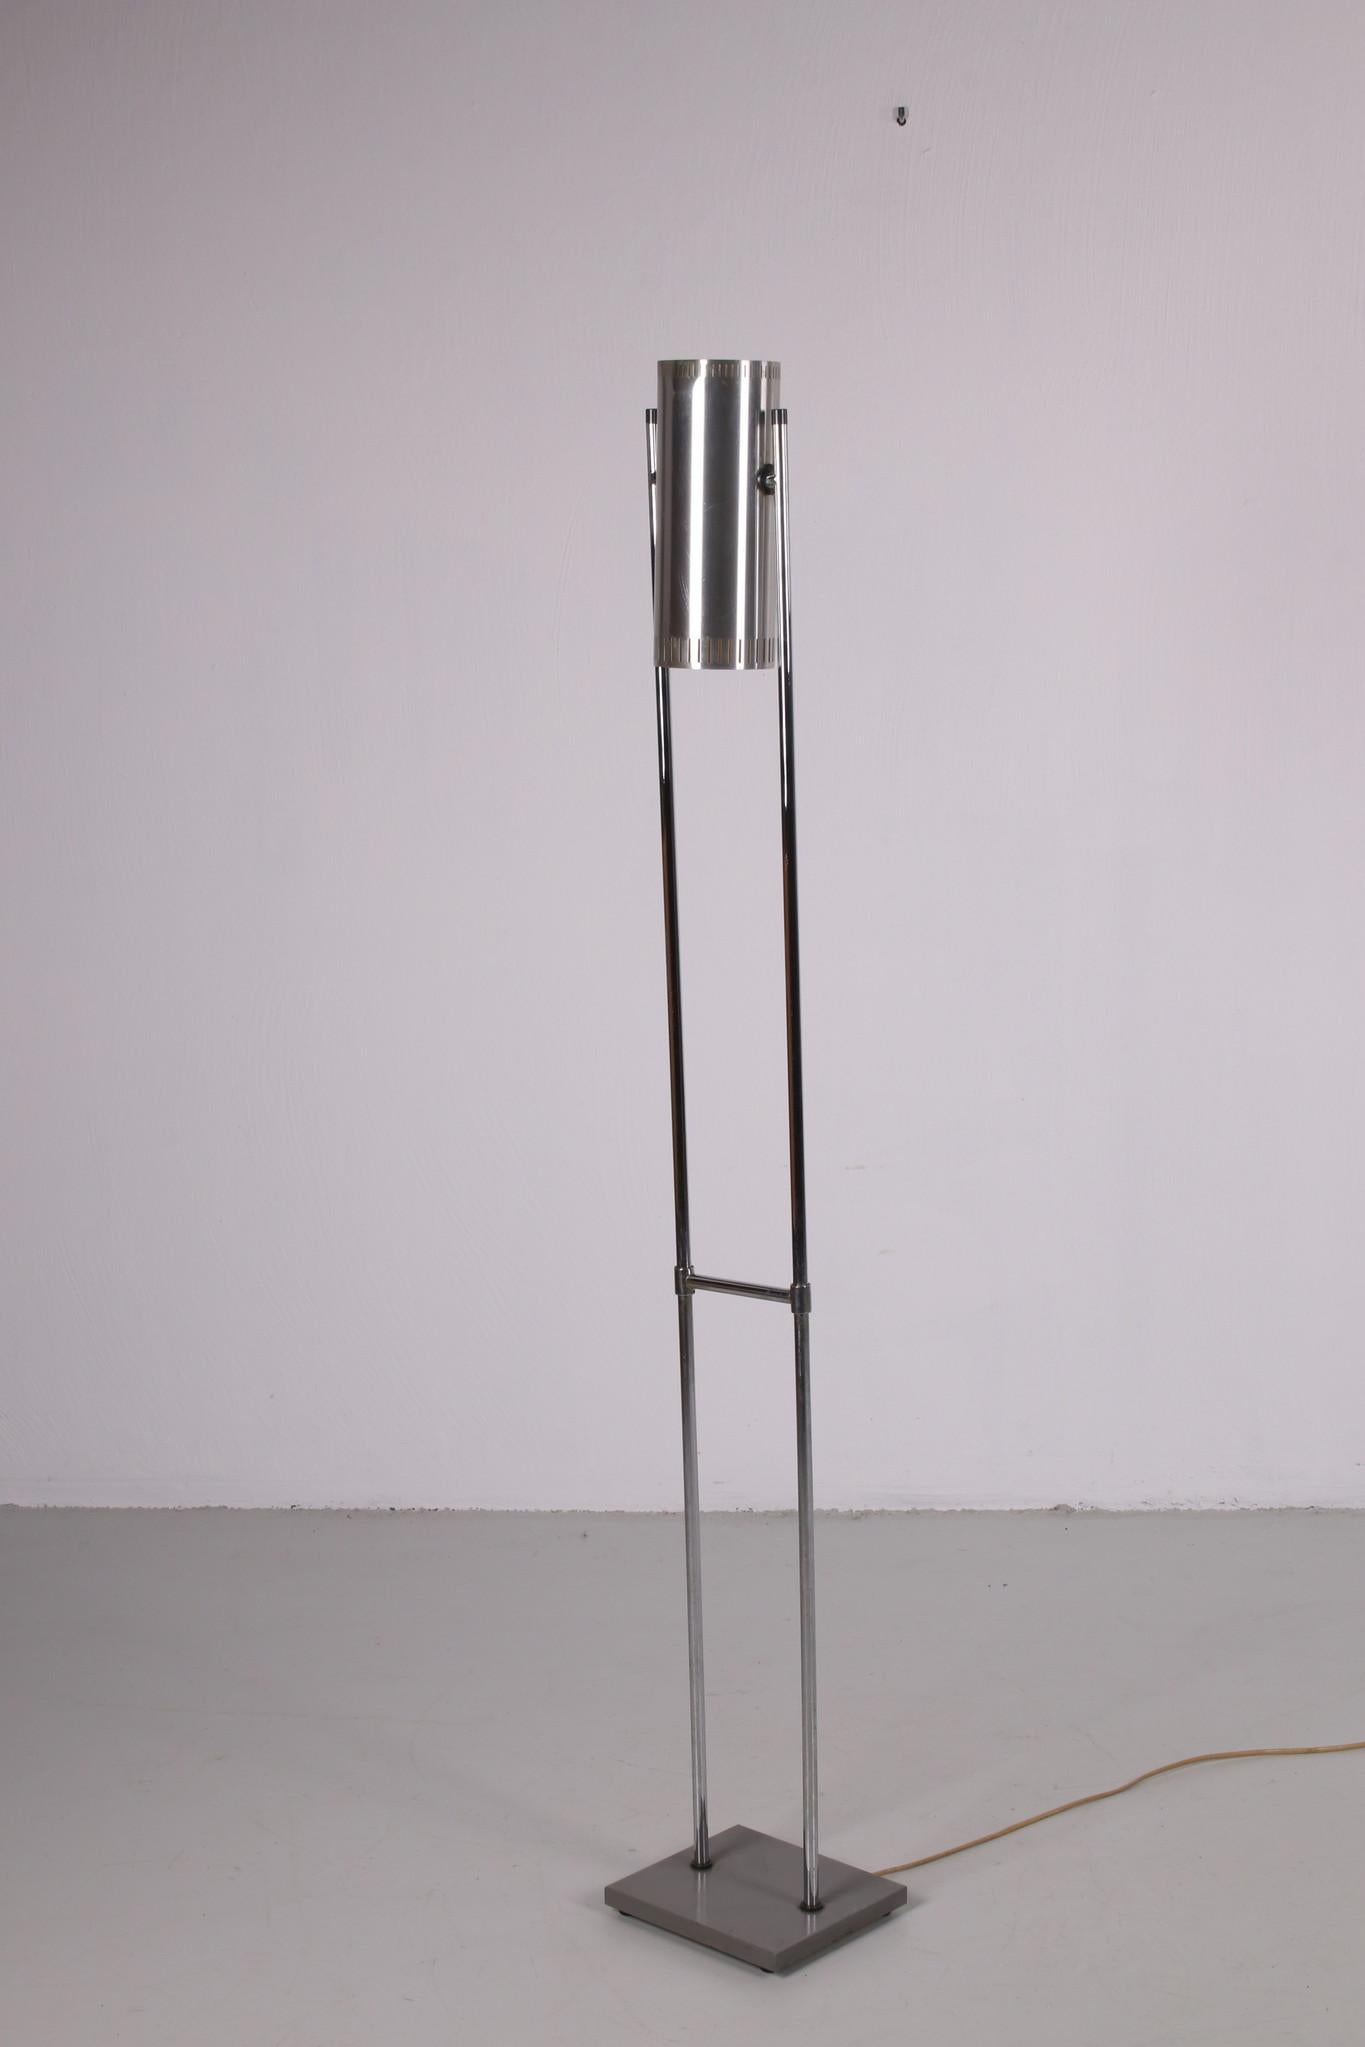 20th Century Floor Lamp Trombone by s For Sale